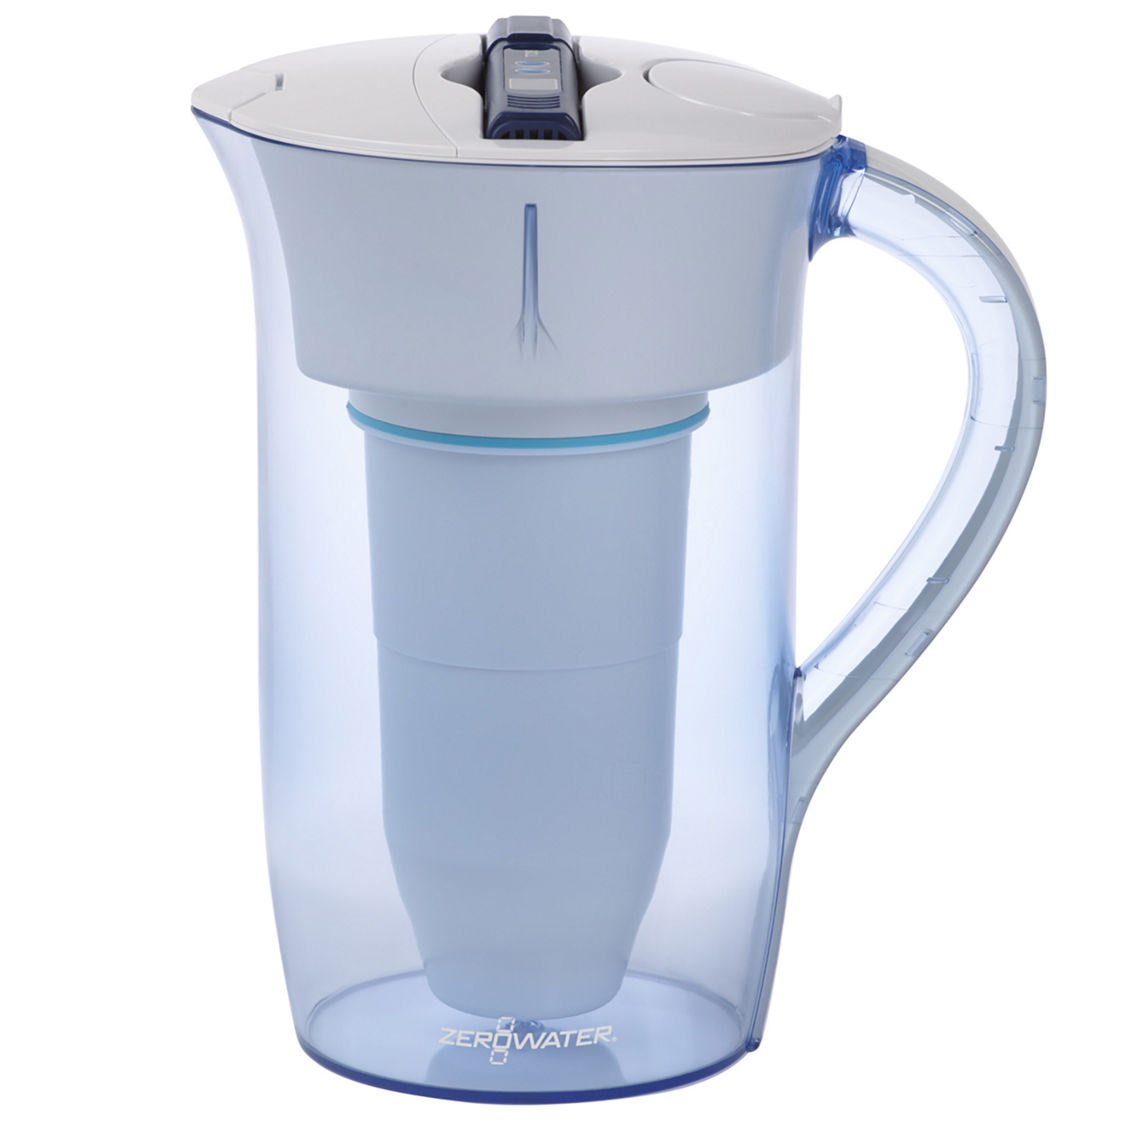 ZeroWater 10 Cup Round Ready Pour Pitcher - Image 2 of 6